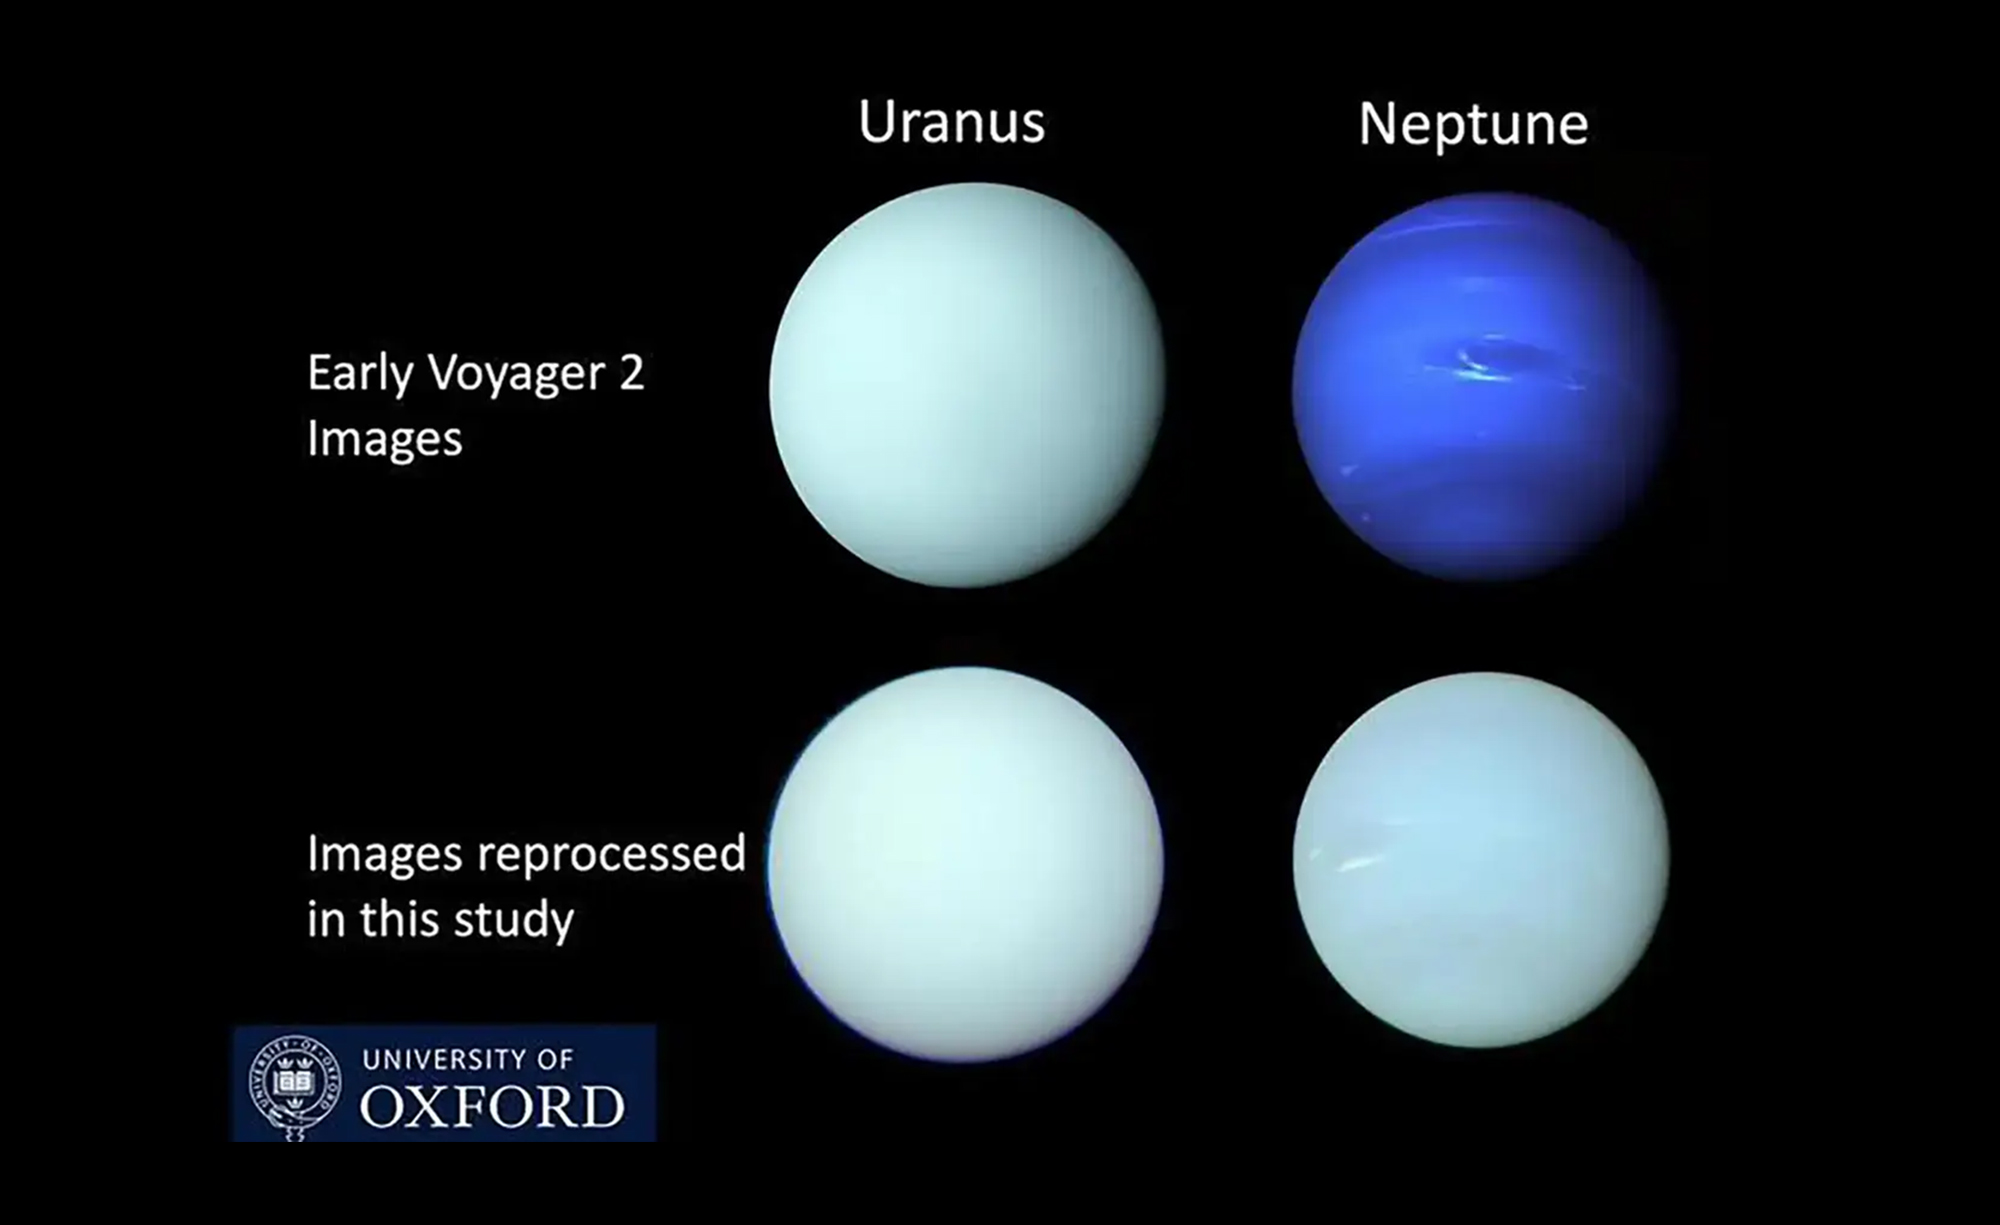 This is what Uranus and Neptune may really look like